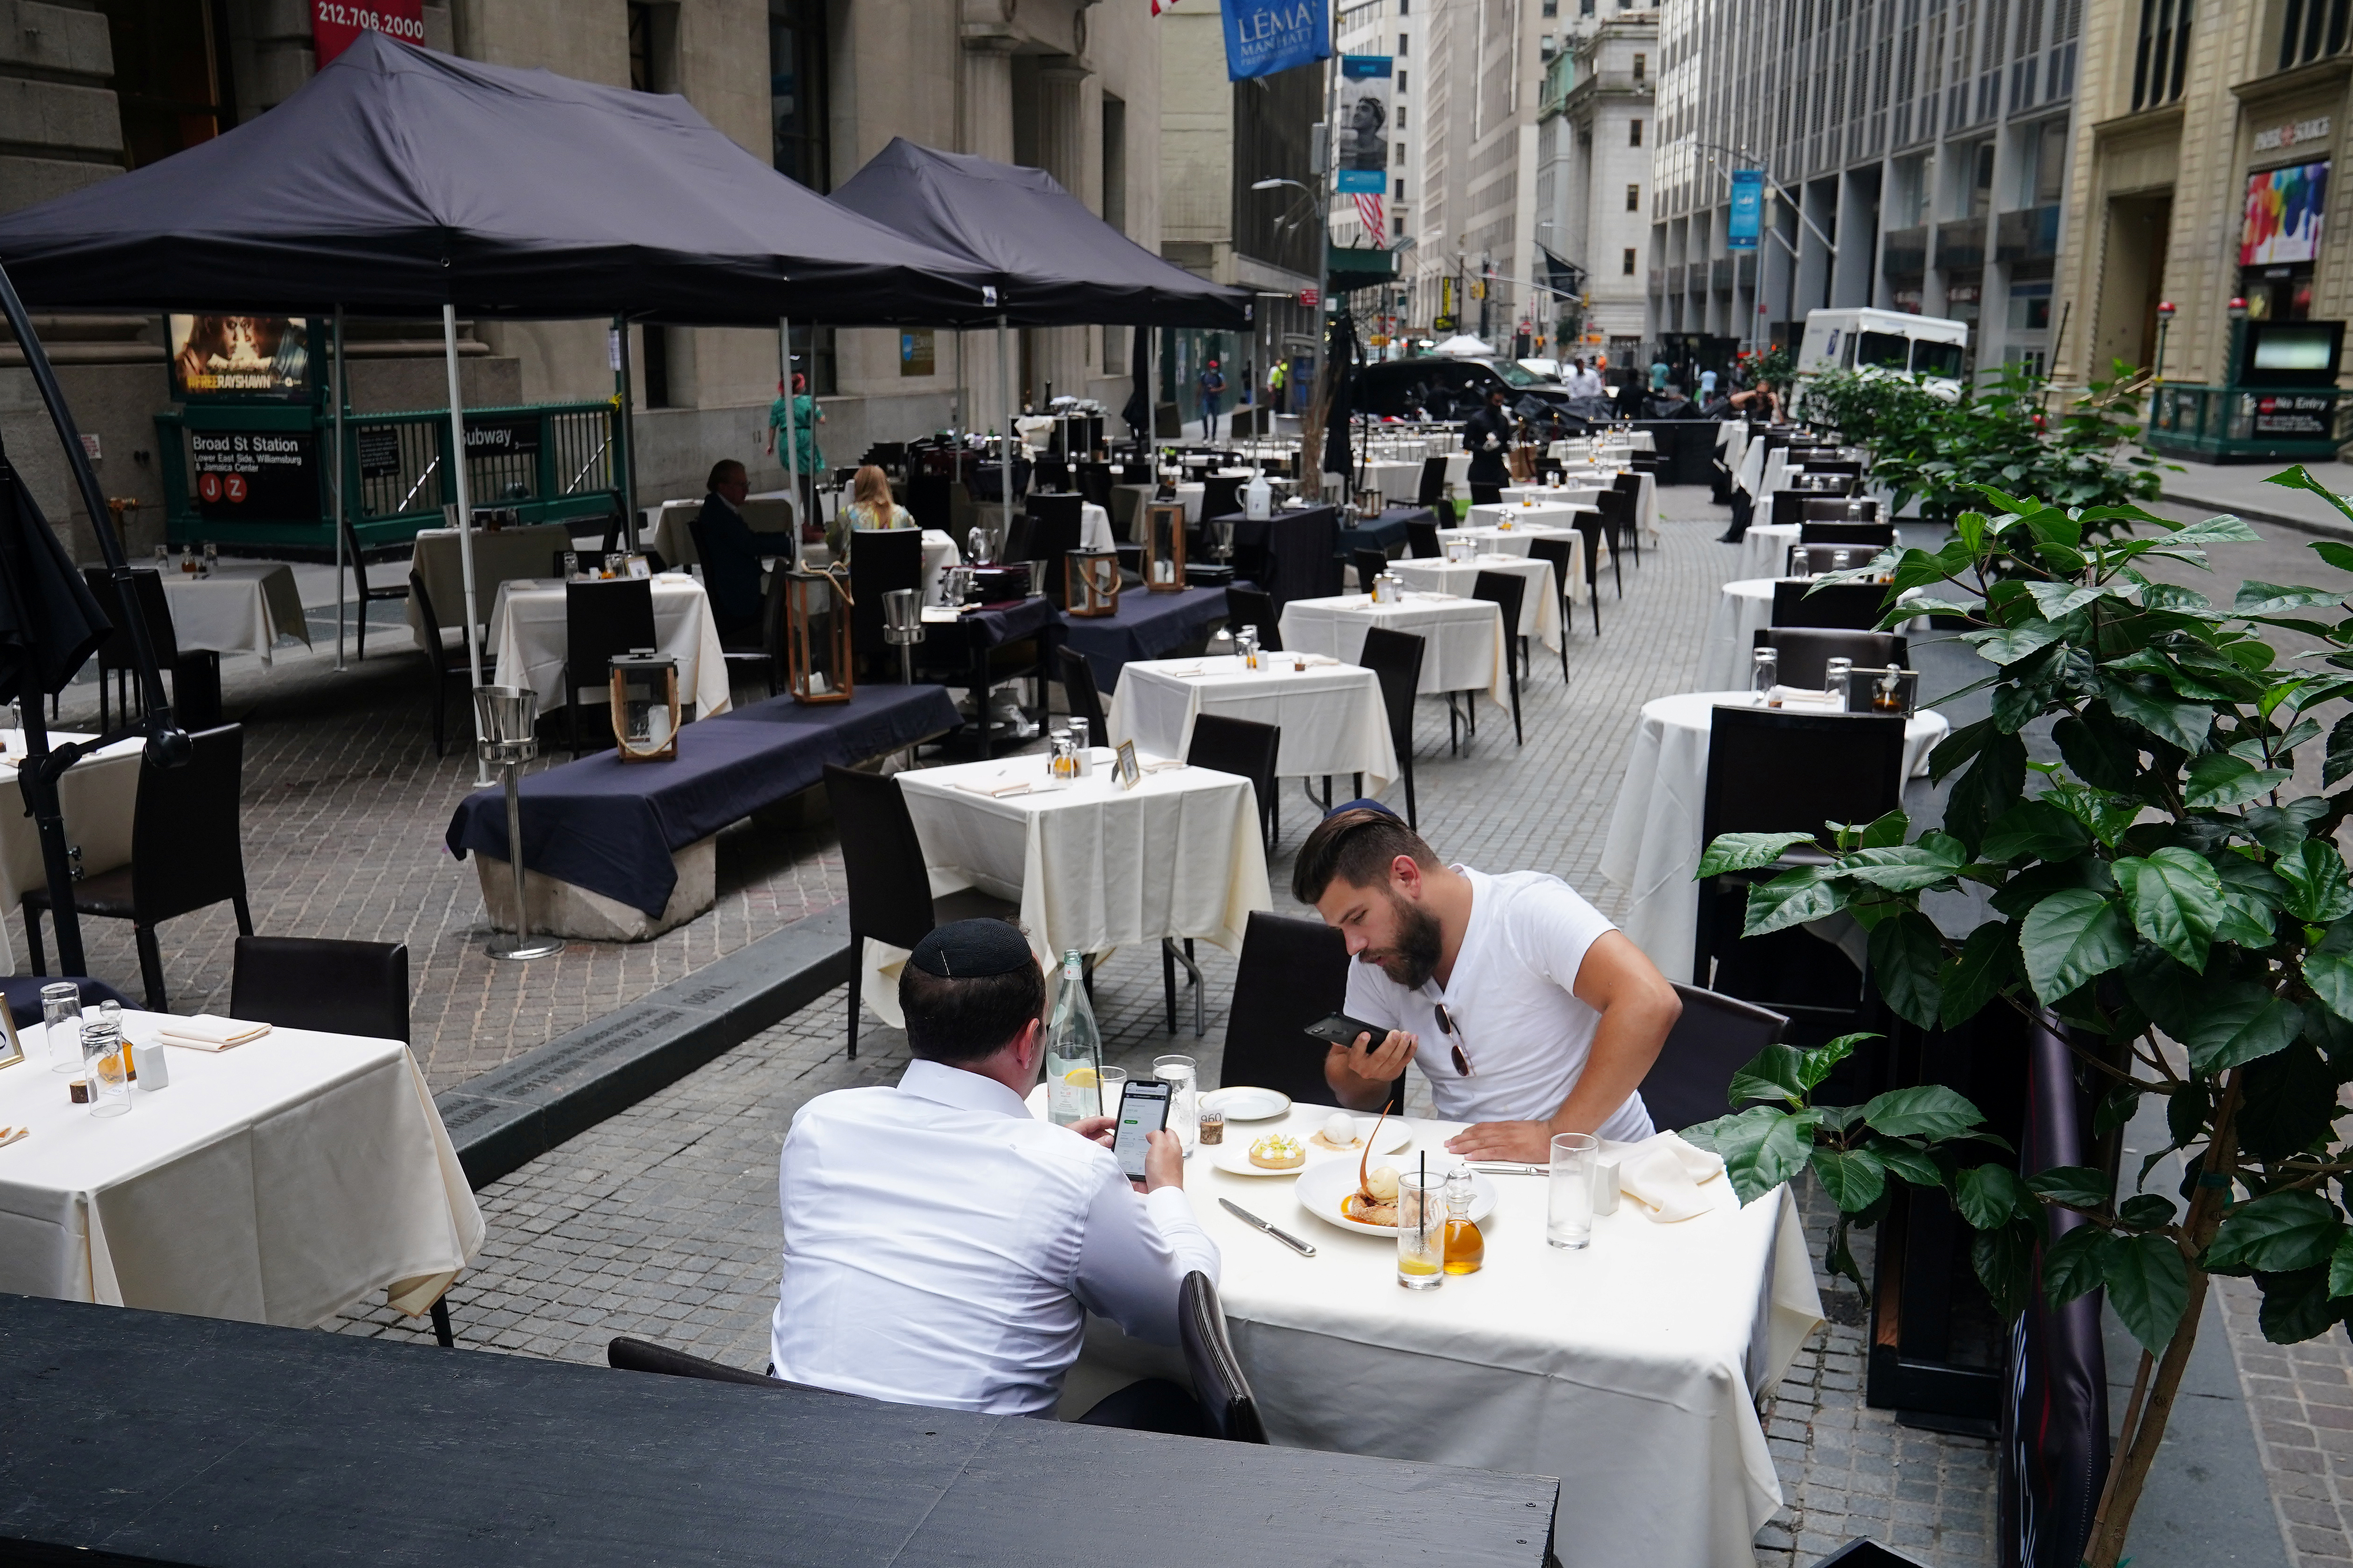 People eat at a mostly empty restaurant with tables on the street in the financial district